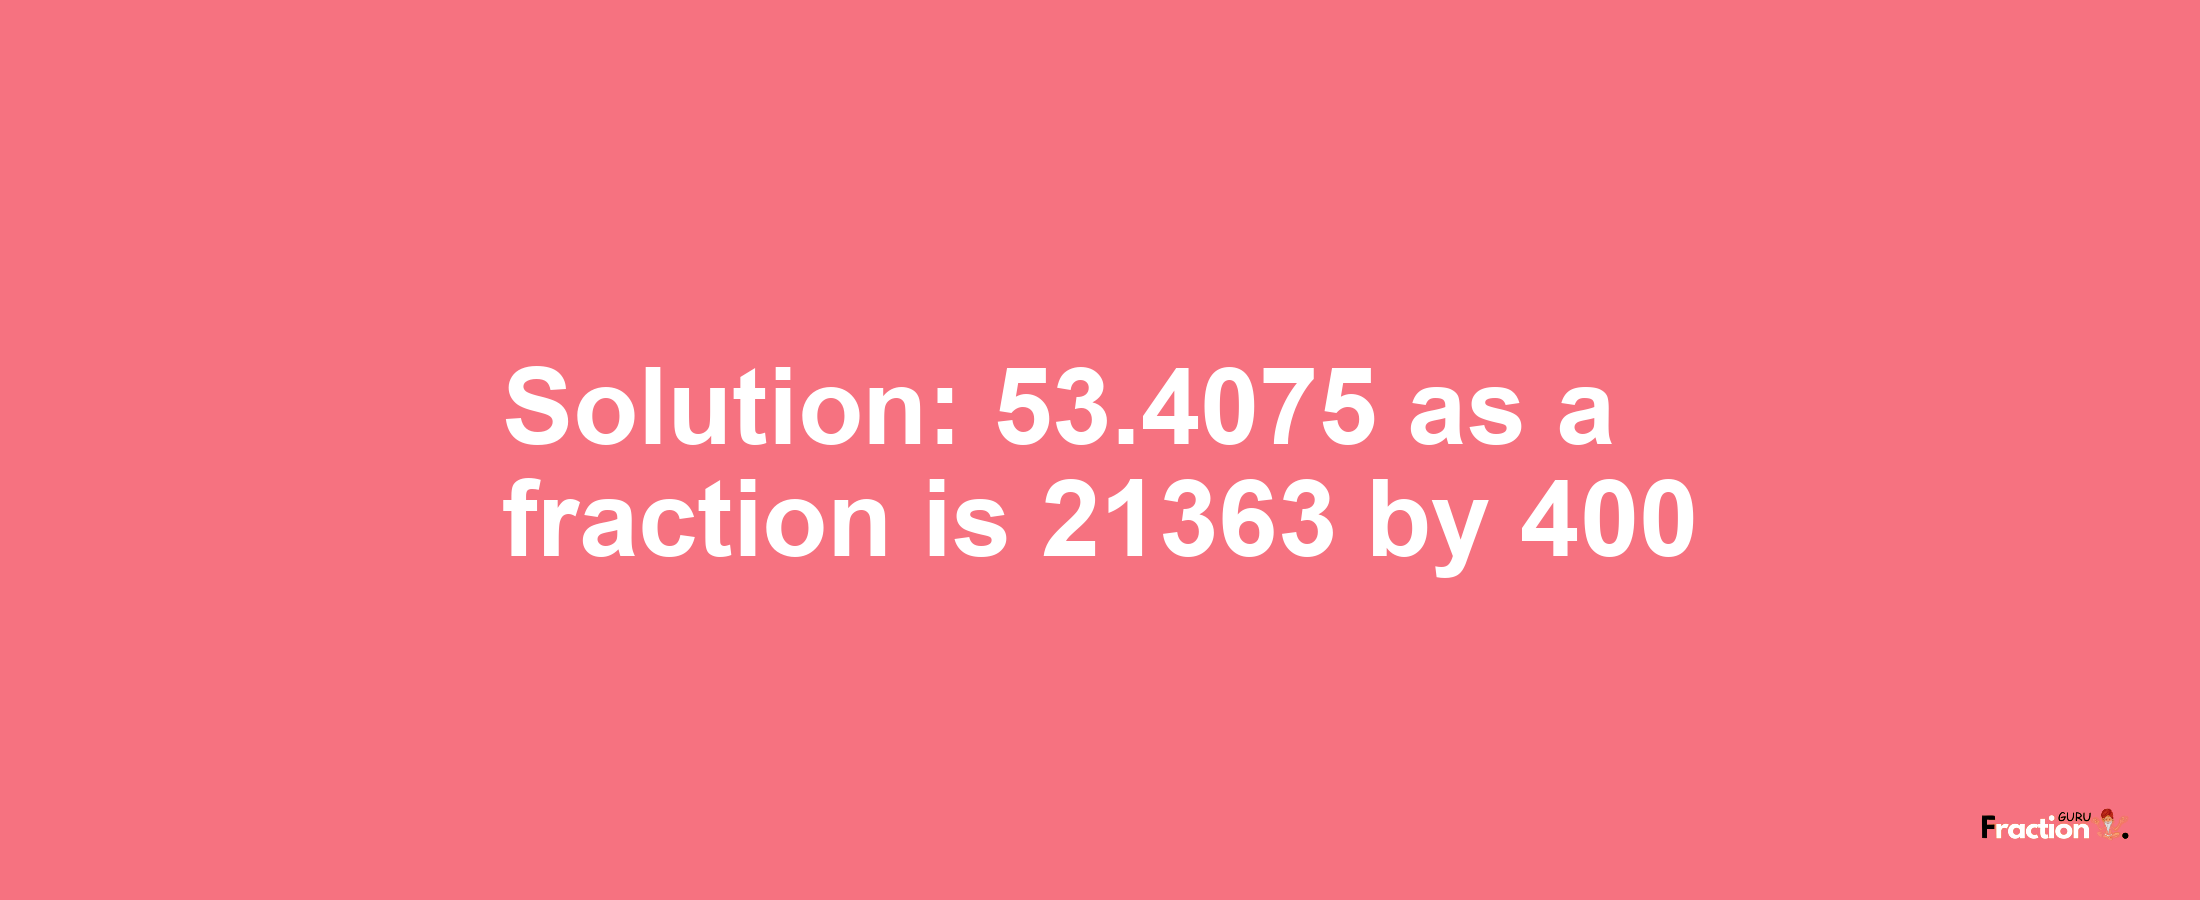 Solution:53.4075 as a fraction is 21363/400